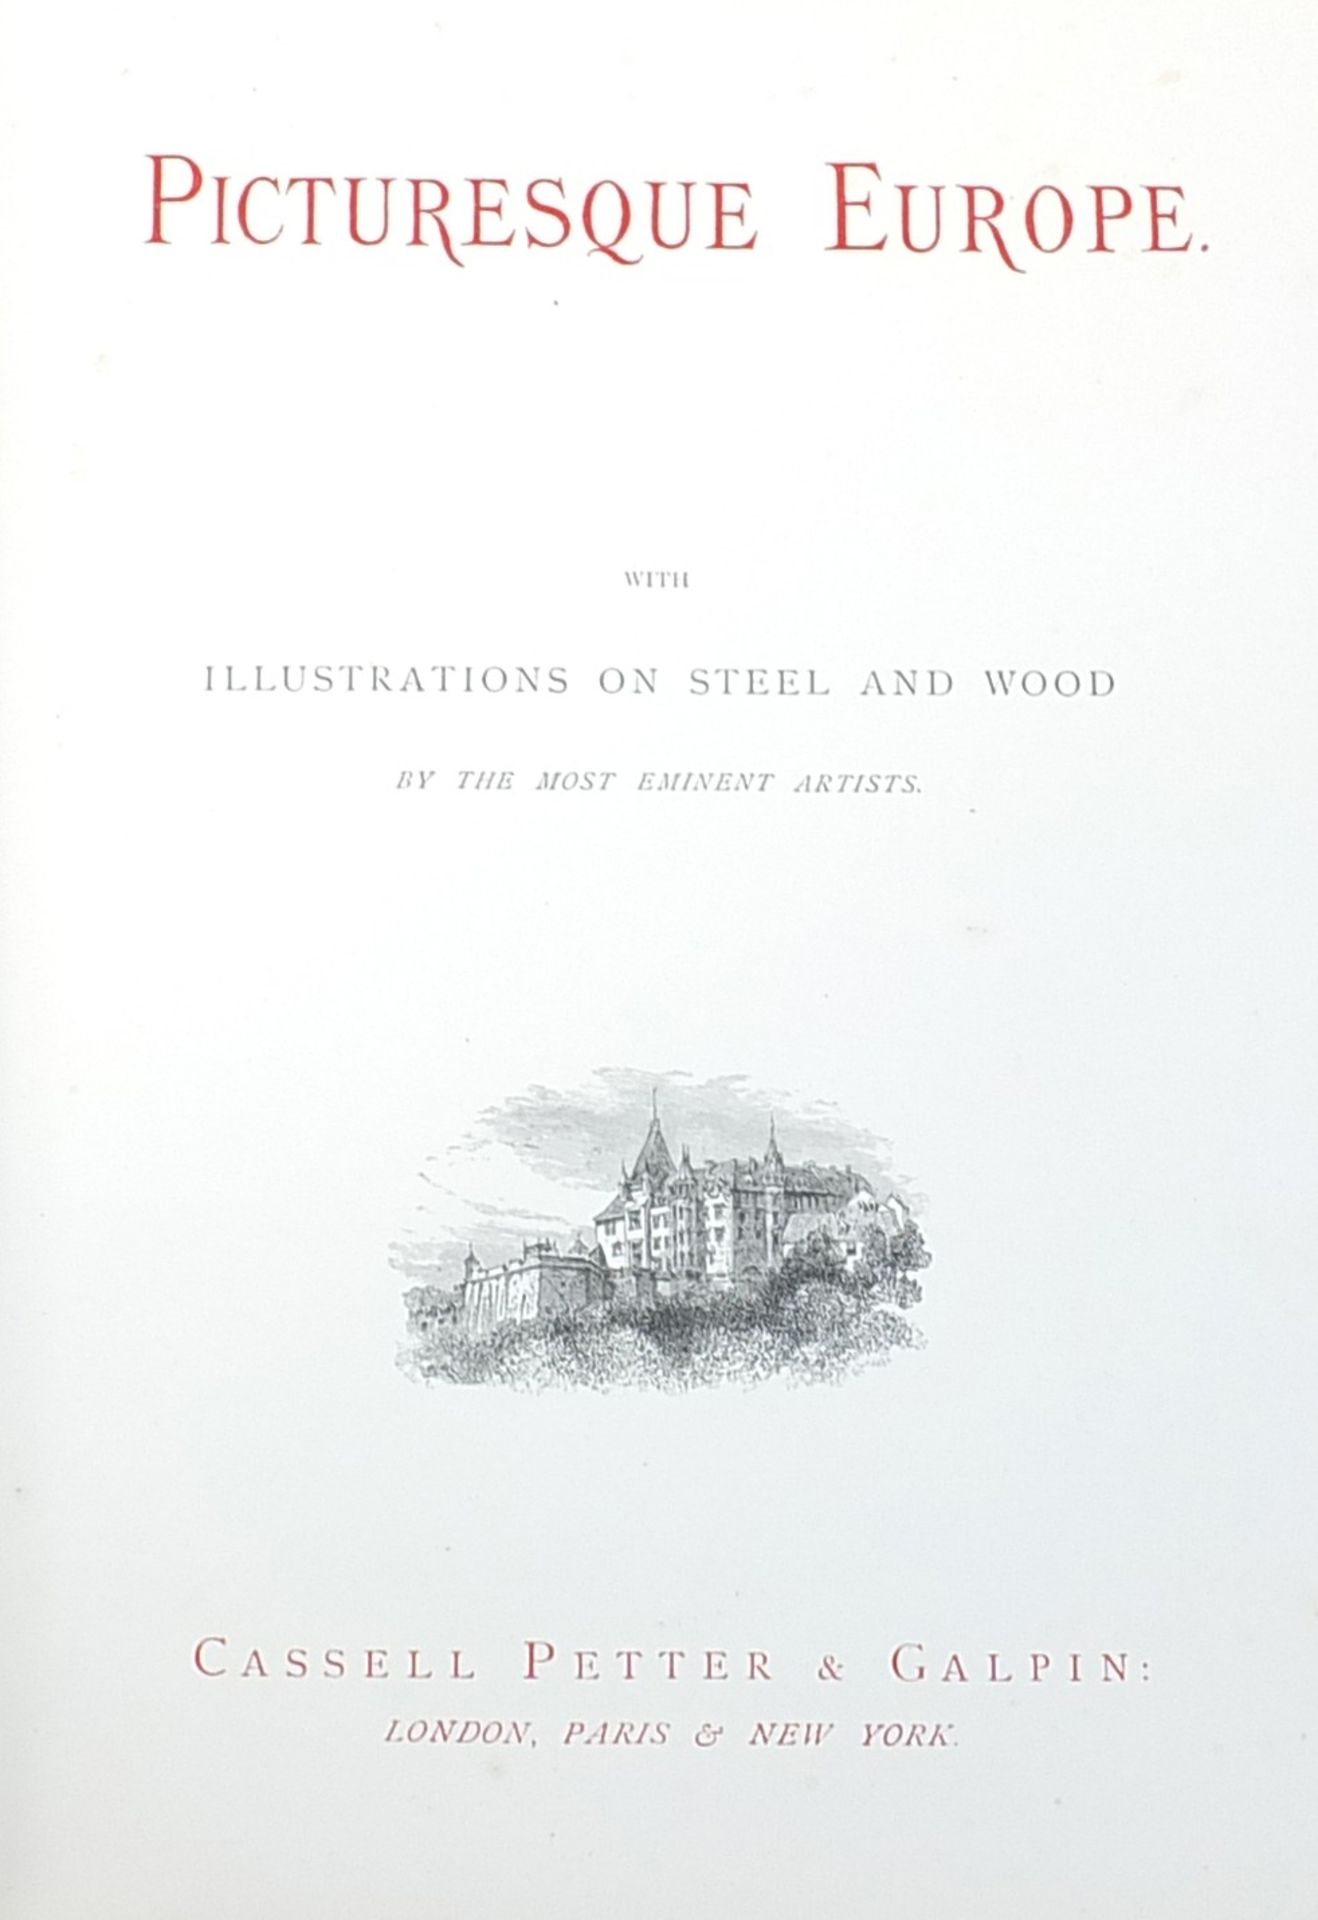 Two volumes of Picturesque Europe with Illustrations on Steel and Wood by Cassell, Petter and - Image 2 of 9